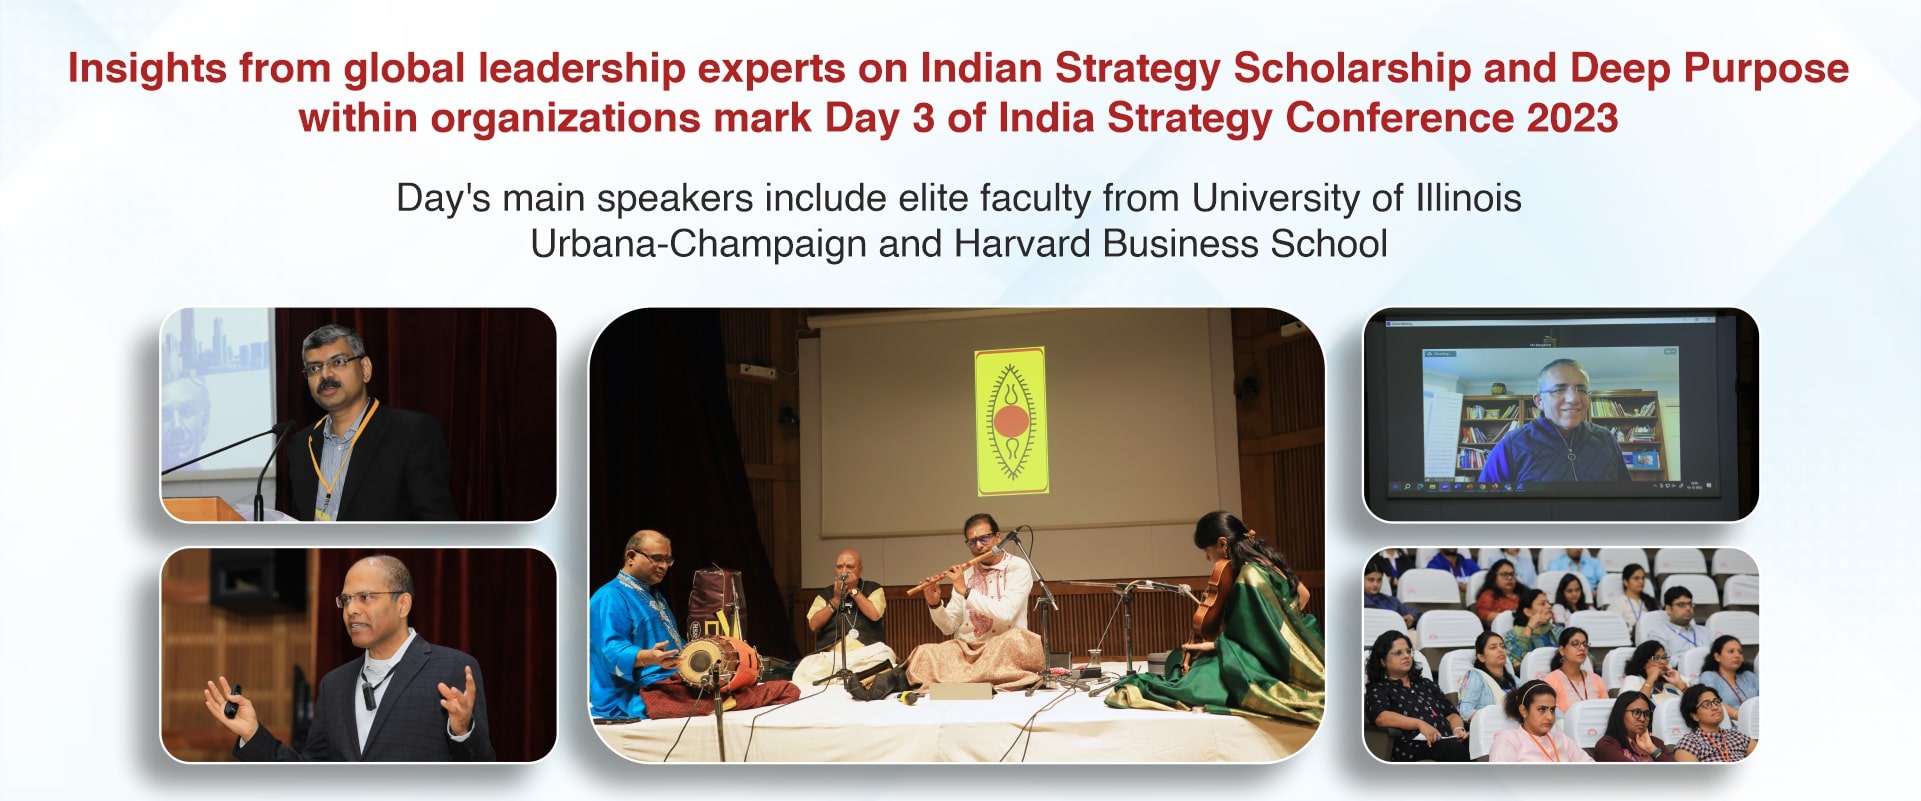 Insights from global leadership experts on Indian Strategy Scholarship and Deep Purpose within organizations mark Day 3 of India Strategy Conference 2023